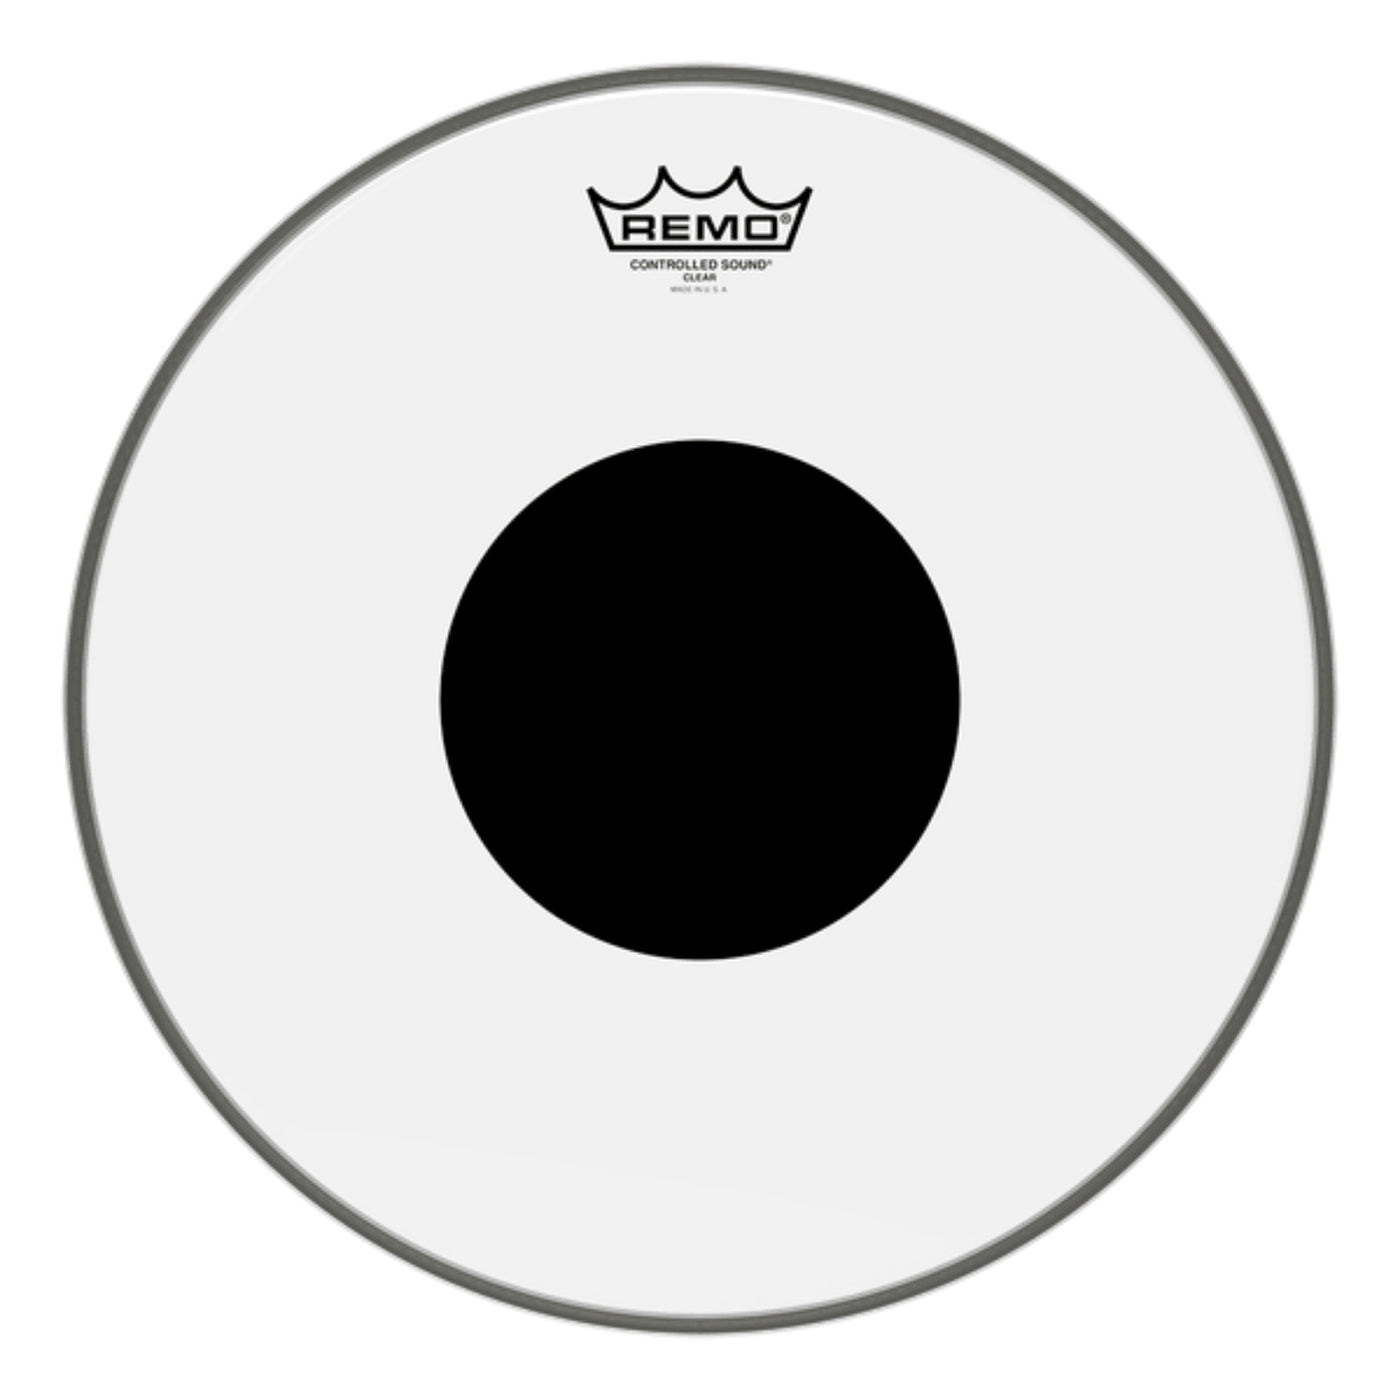 Remo CS-0316-10 16" Controlled Sound Clear Drum Head with Black Dot